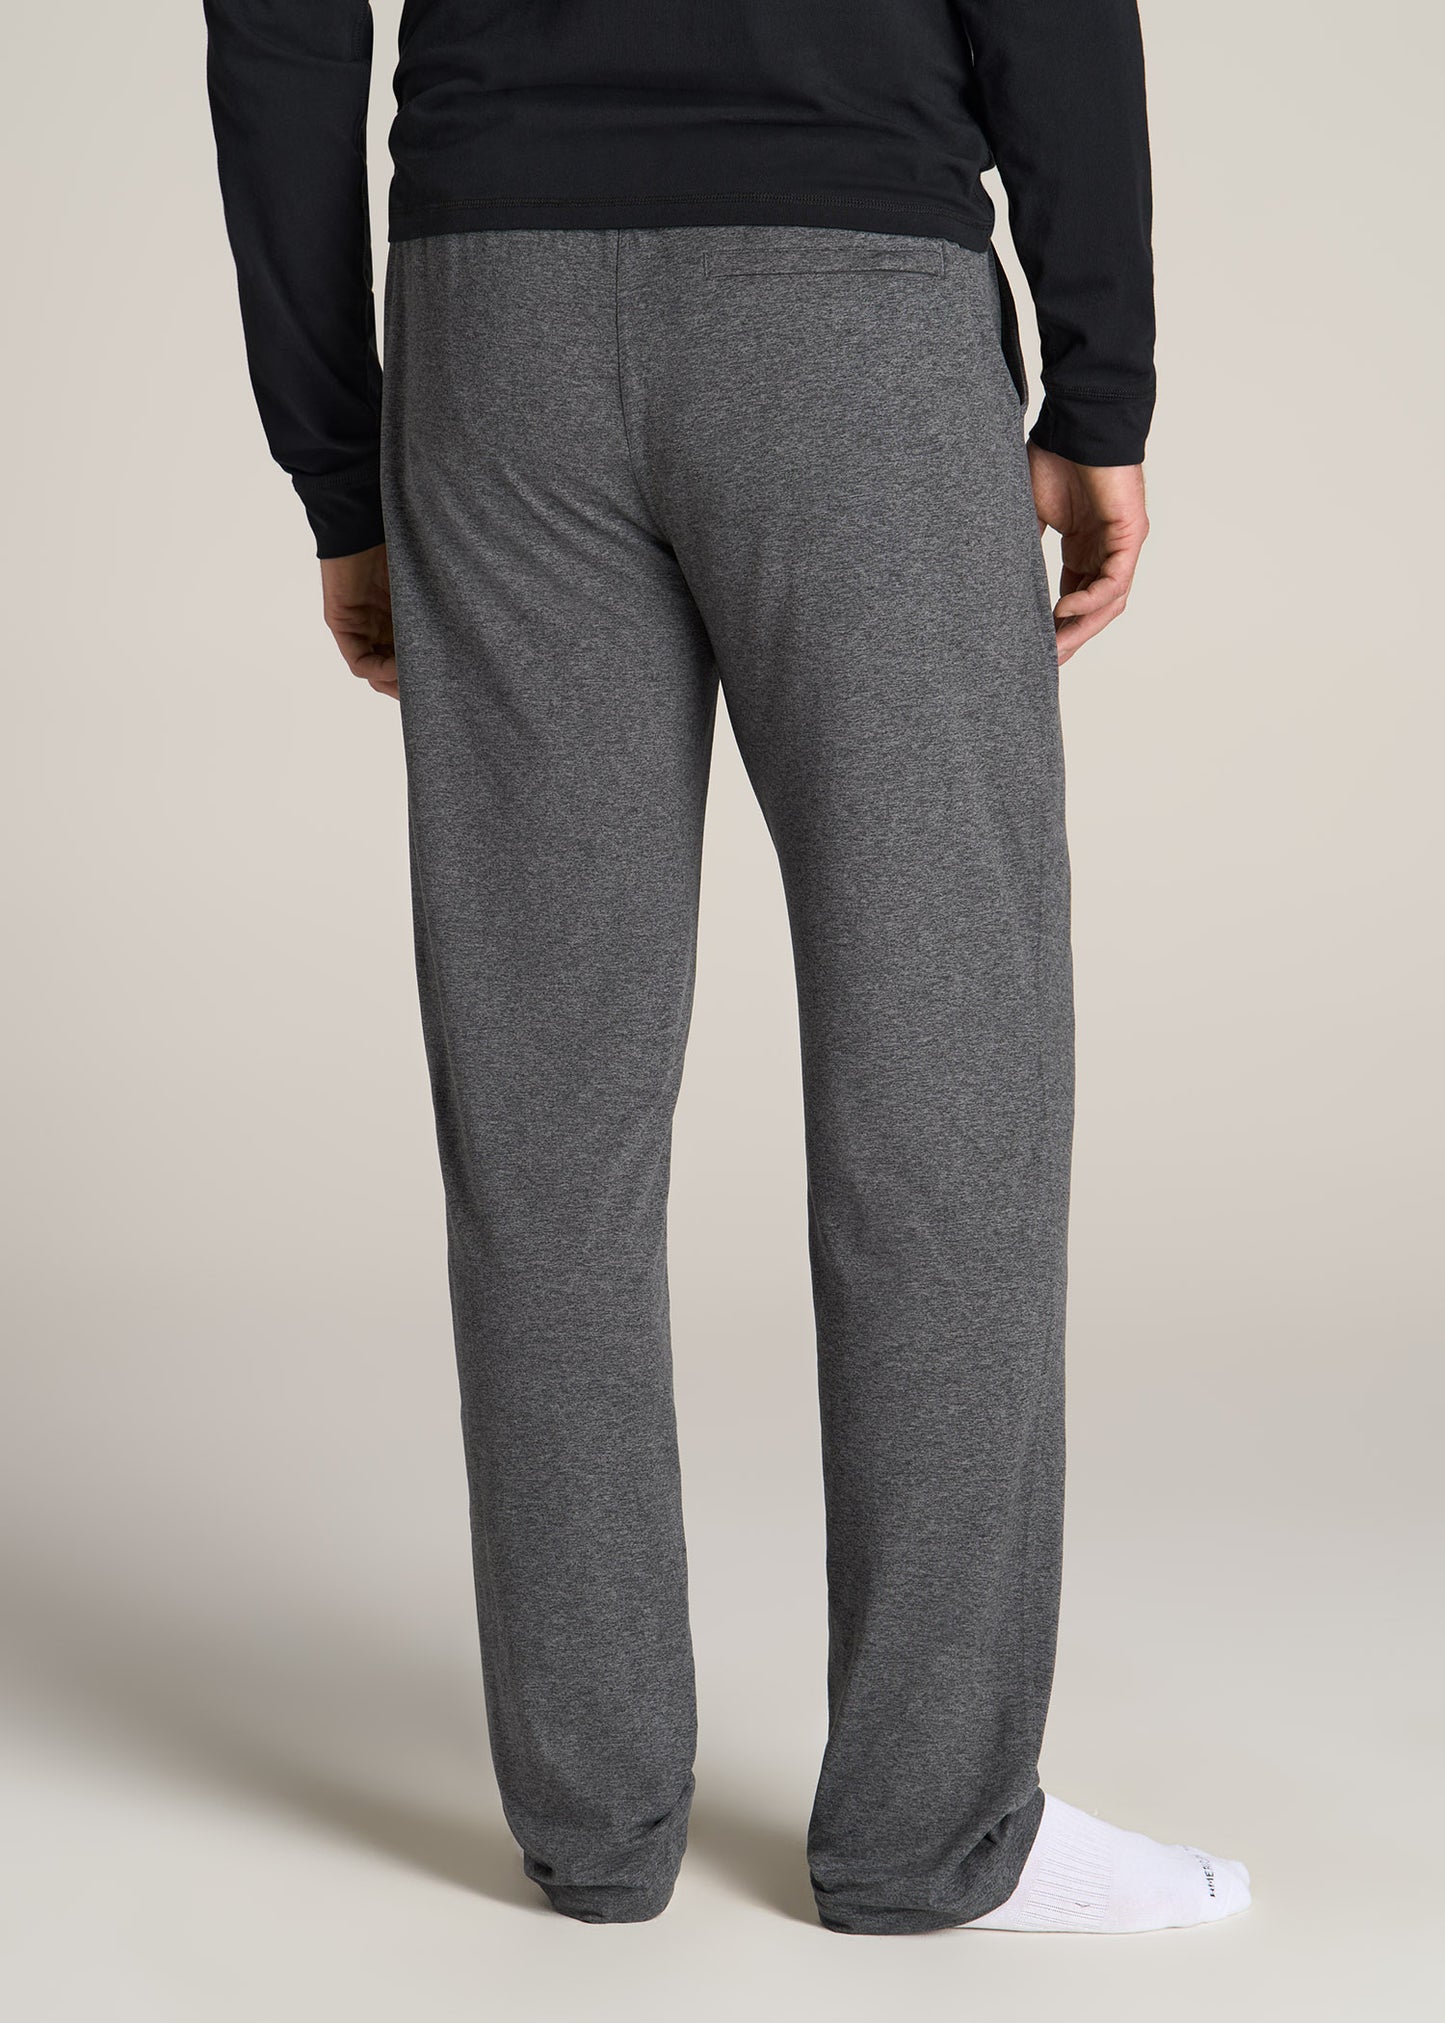 American-Tall-Men-Weekender-Stretch-Lounge-Pant-Charcoal-Mix-back